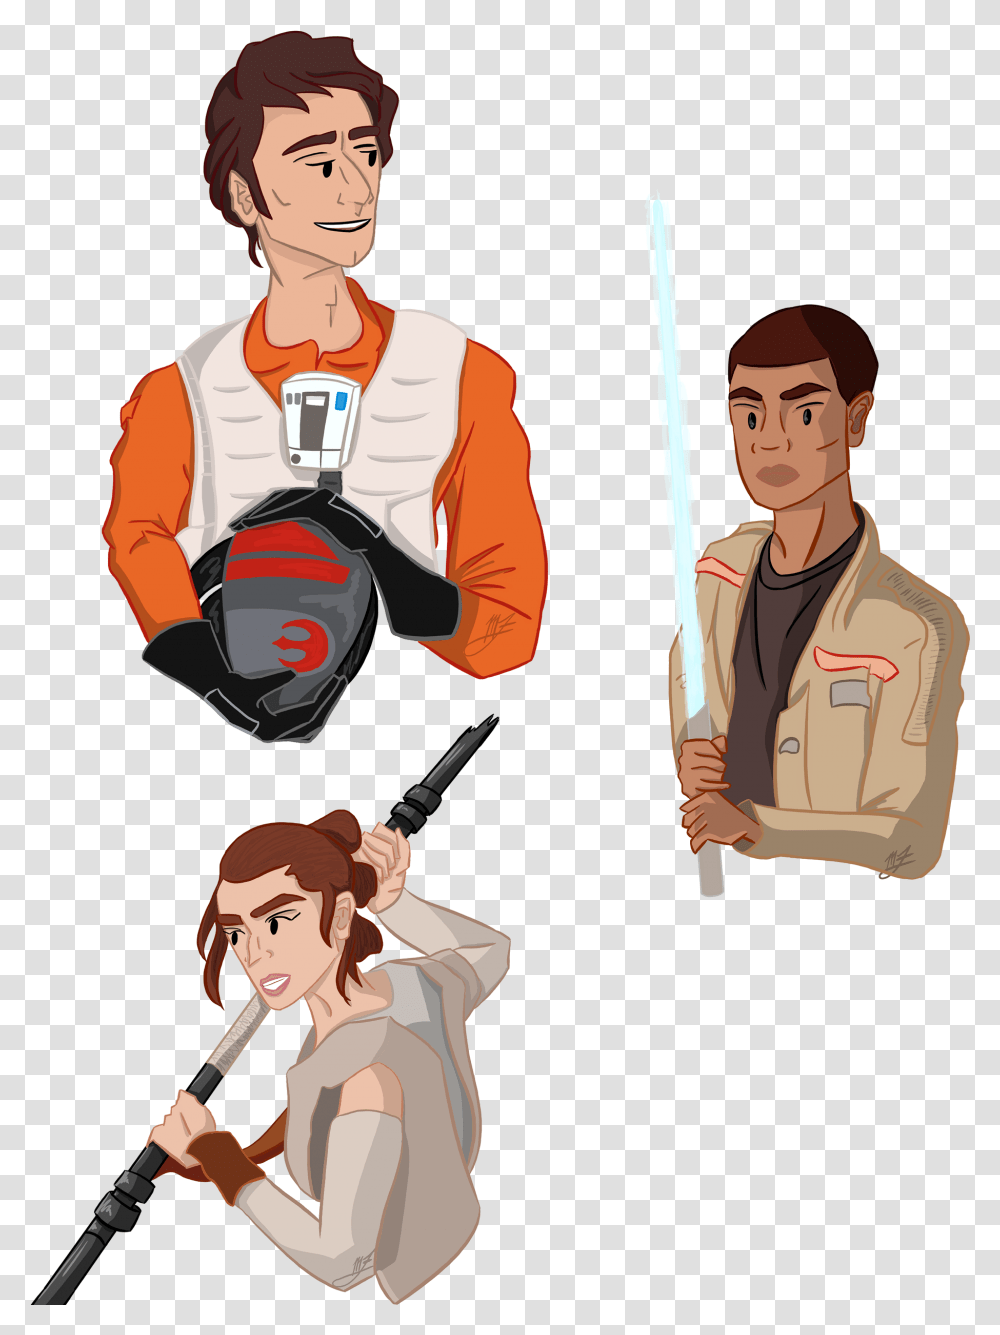 Busts Of Poe Finn And Rey From Star Wars Cartoon, Person, Book, Comics Transparent Png